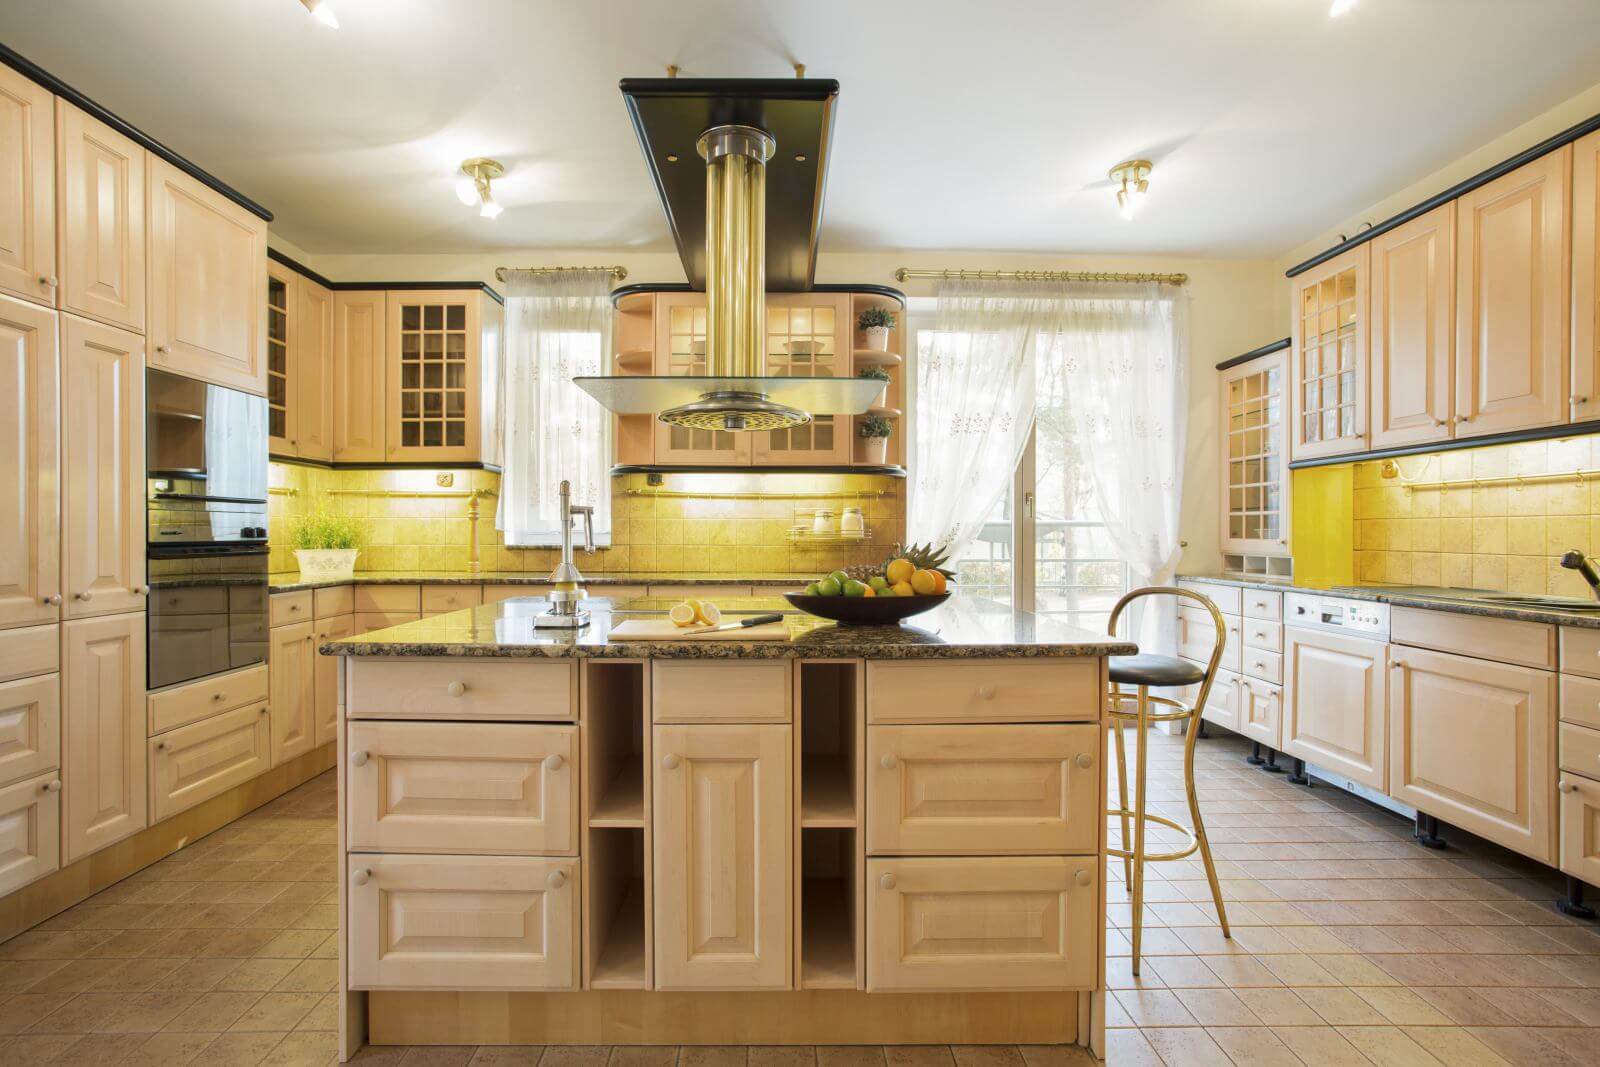 Old fashioned spacious kitchen with island